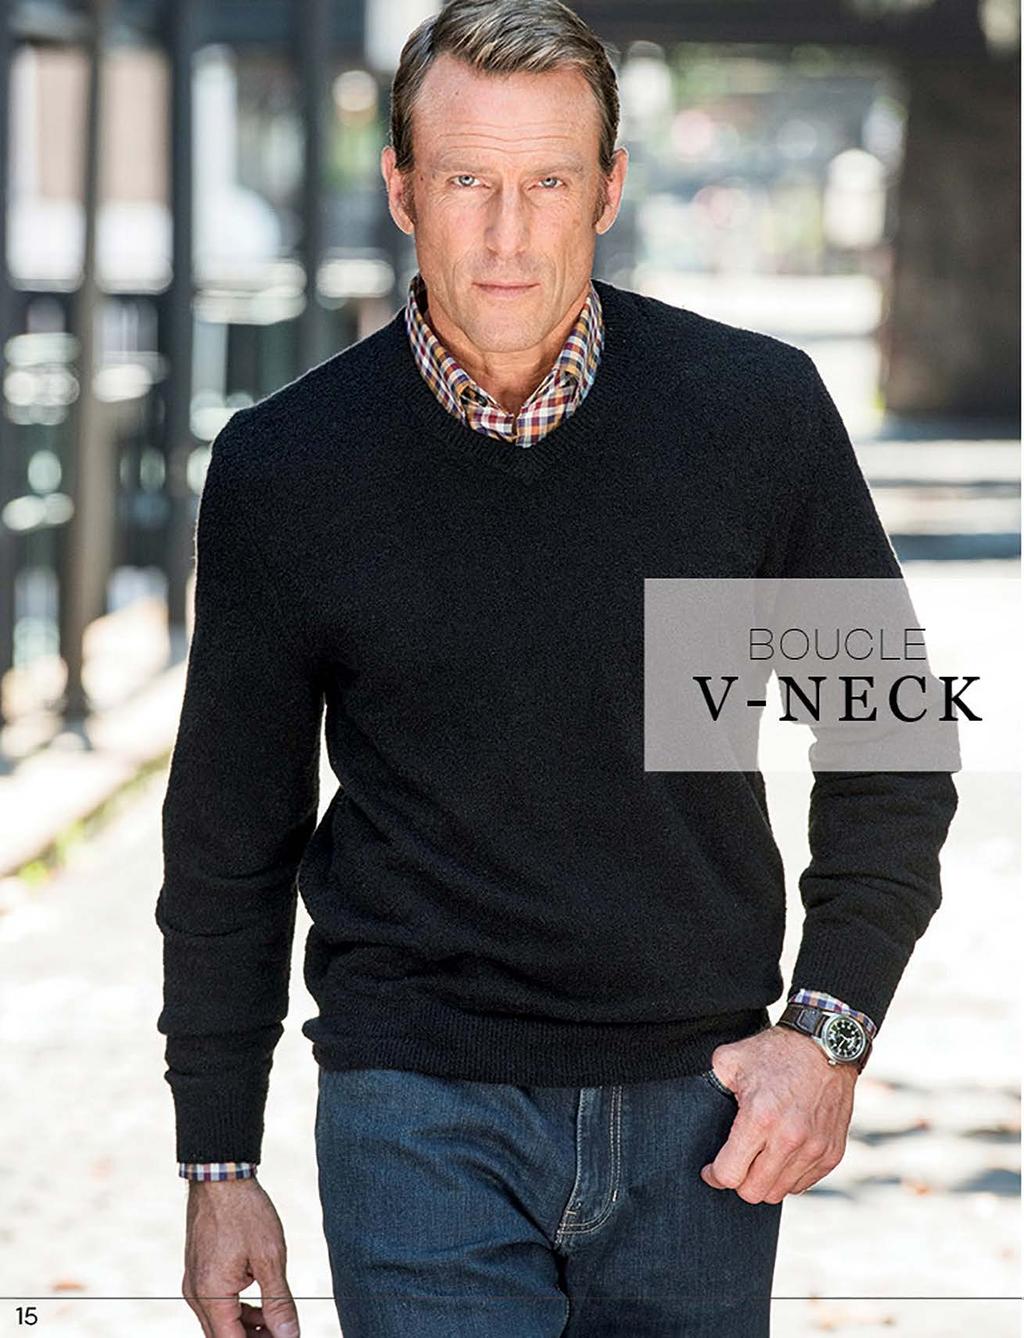 Comfortable is the word for this sweater. Boucle is a knit stitch with small knots on the surface. This gives it loft and elasticity along with a soft touch.